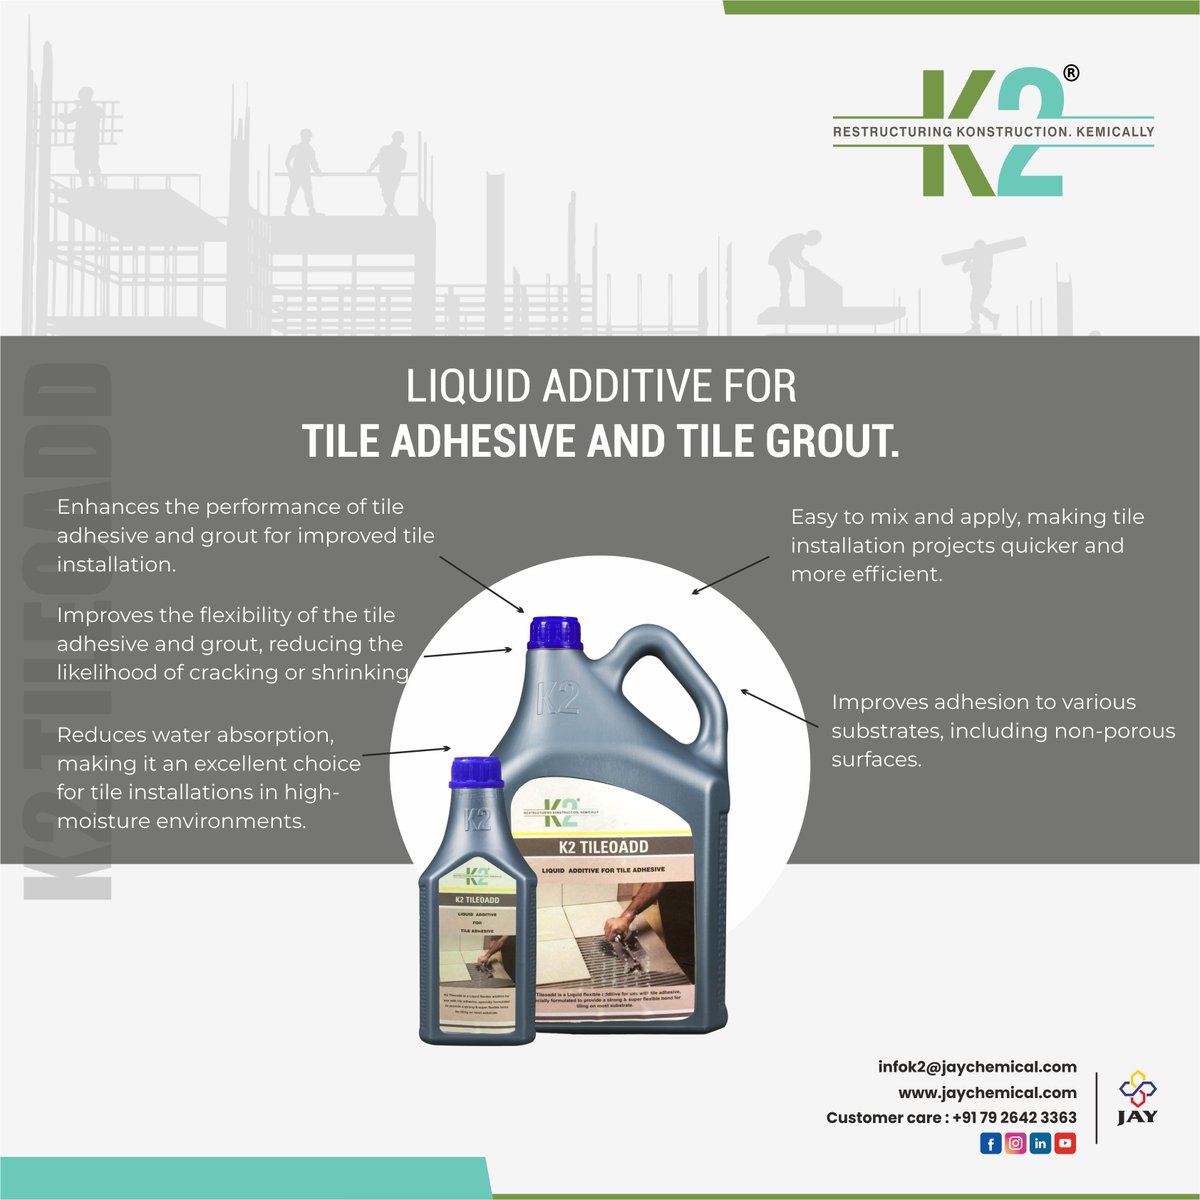 Say goodbye to tile mishaps!🖐⬜
#liquidadditive #tileadhesive #tilegrout #improves #flexibility #adhesion #durability #waterabsorption #enhance #properties #shrinking #likelihood #moistureenvironment #moreefficient #surfaces #bestquality #renovation #constructionchemicals